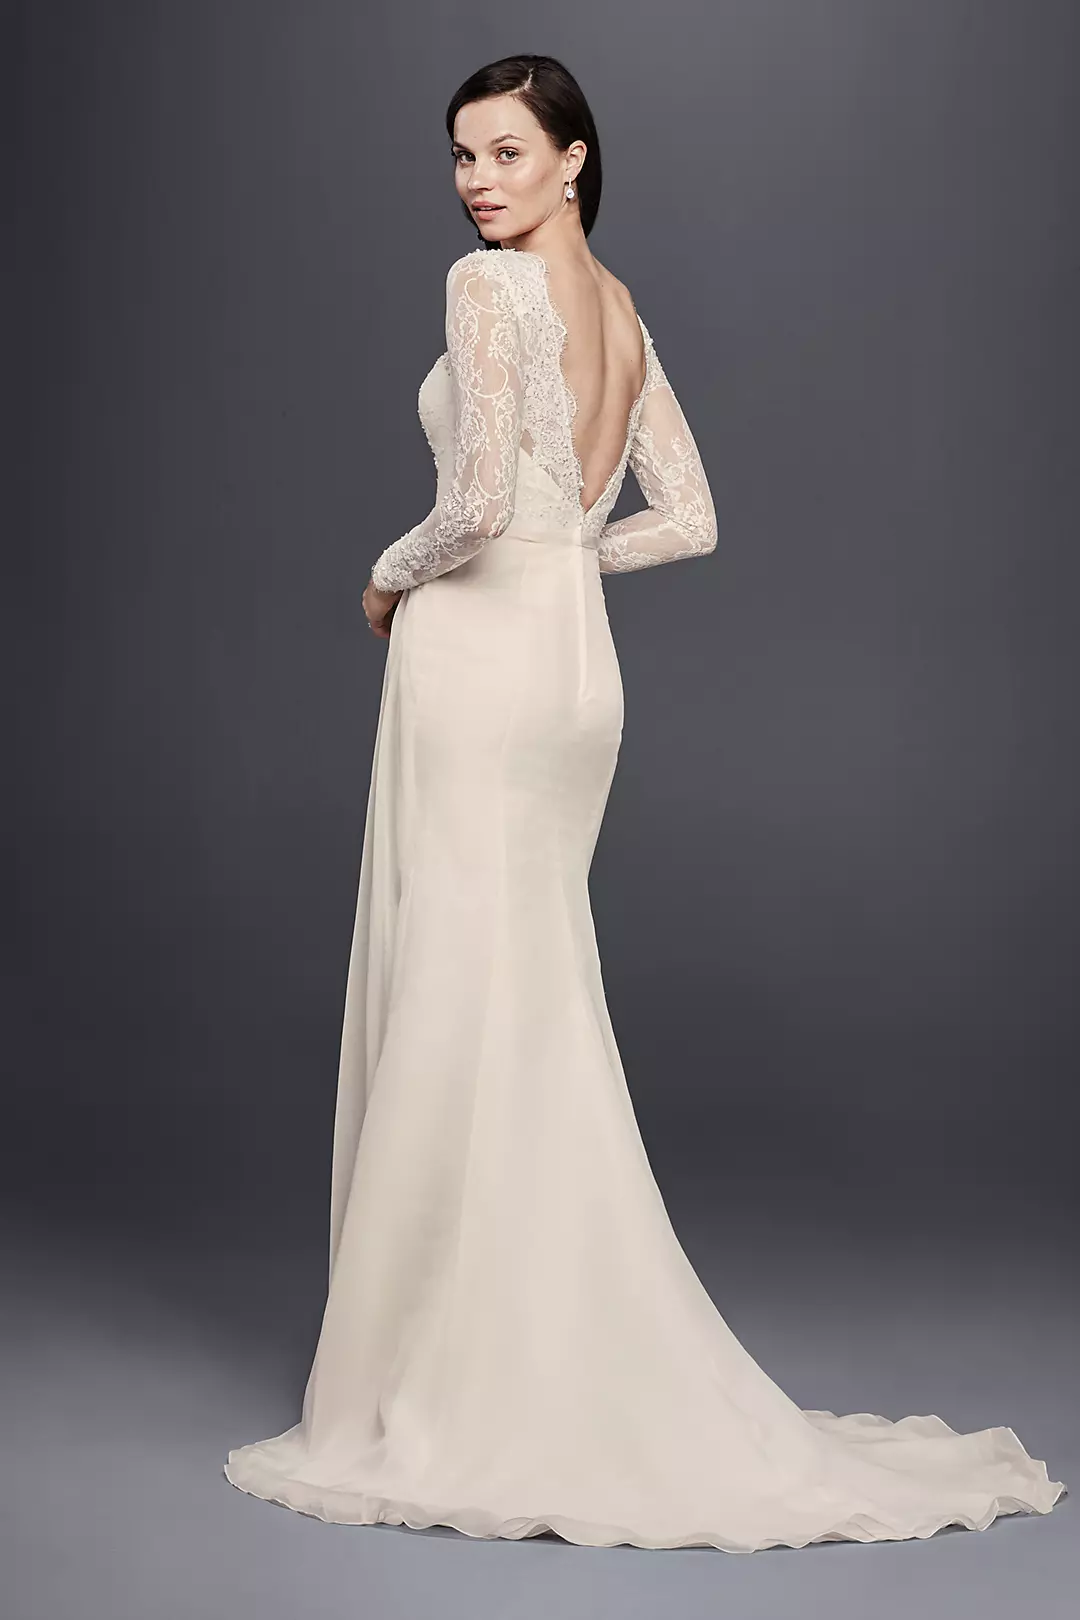 Chiffon Wedding Dress with Low V-Neck and Back Image 2